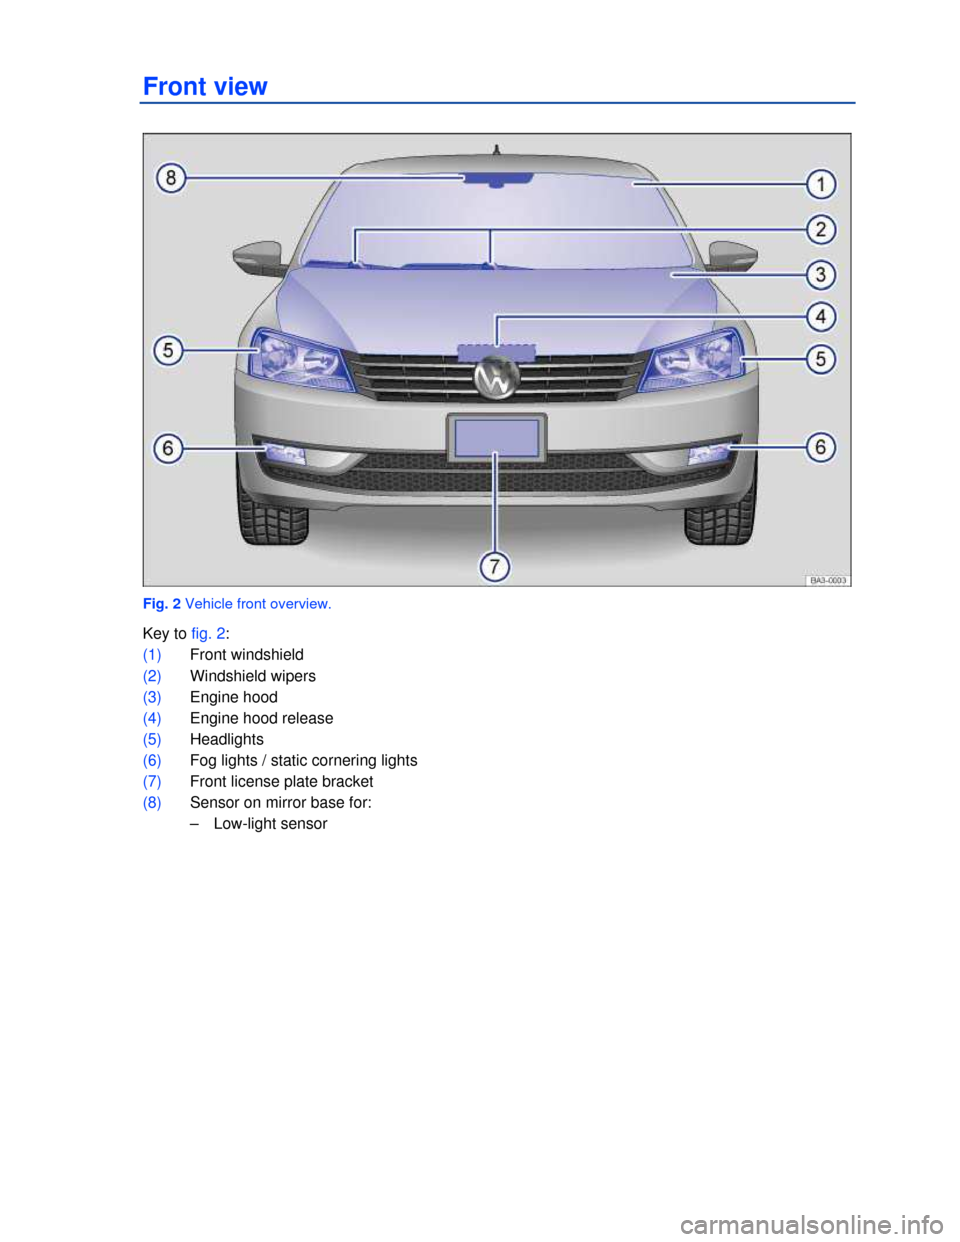 VOLKSWAGEN PASSAT 2013 B8 / 6.G Owners Manual  
Front view 
 
Fig. 2 Vehicle front overview. 
Key to fig. 2: 
(1) Front windshield 
(2) Windshield wipers  
(3) Engine hood  
(4) Engine hood release  
(5) Headlights  
(6) Fog lights / static corne